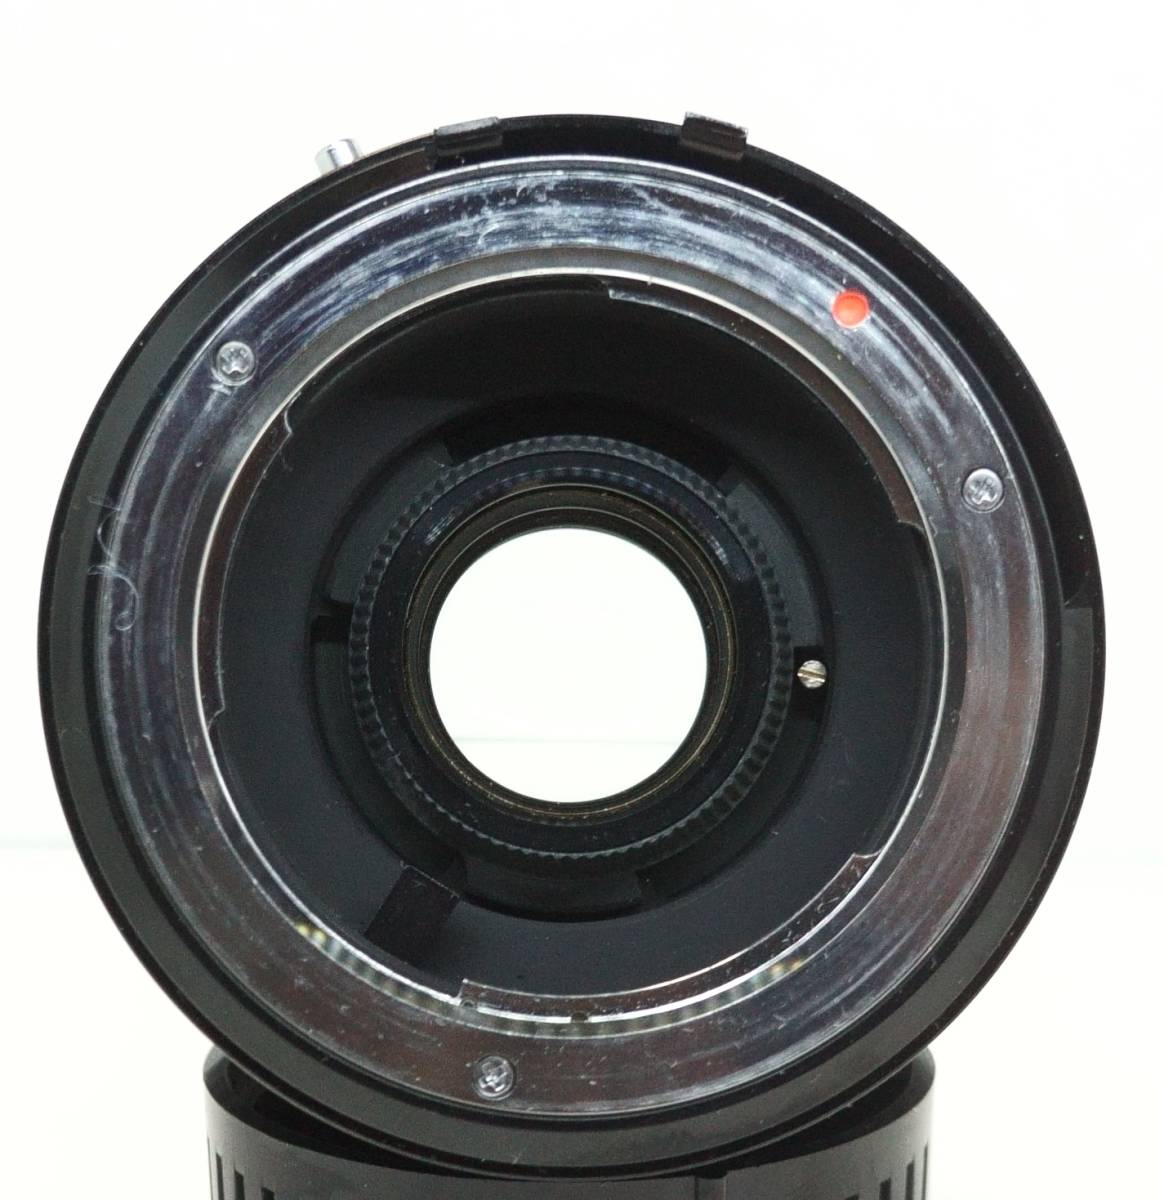 * optics excellent * popular telephoto lens (2 times seeing at distance )* Minolta MD mount for SIGMA TELE-MACRO 2X-1:1 FOR MINOLTA (H0368)